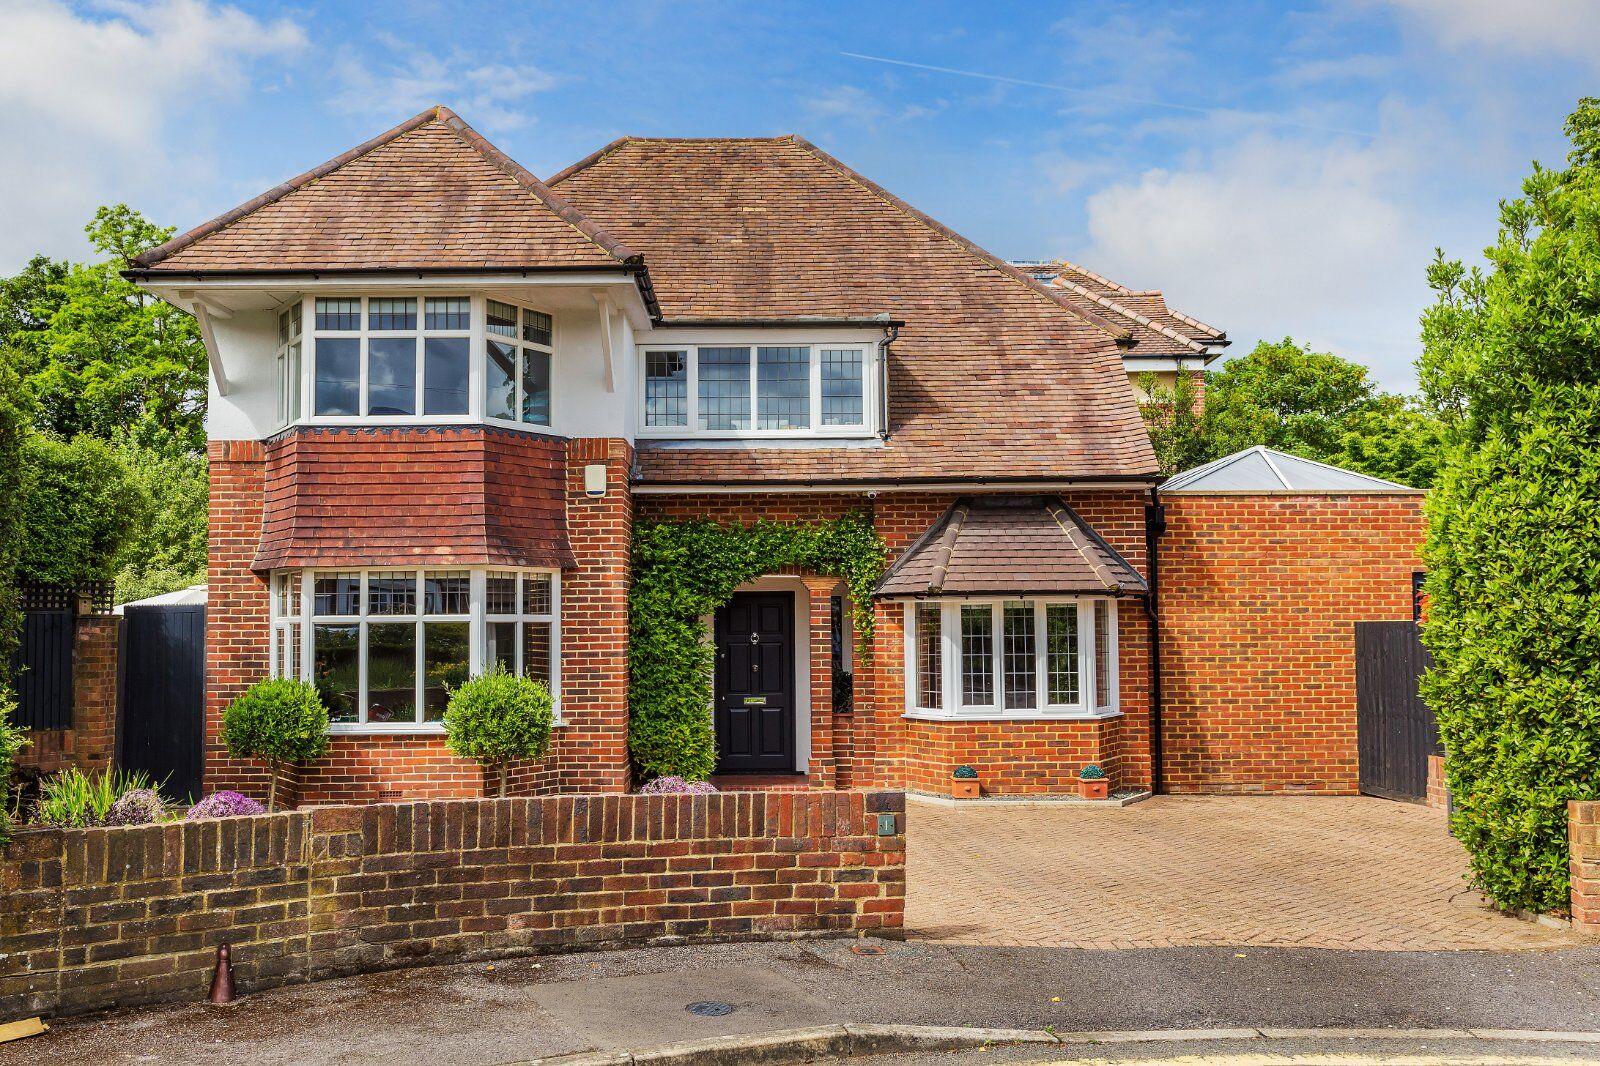 4 bedroom detached house for sale Coniston Gardens, South Sutton, SM2, main image